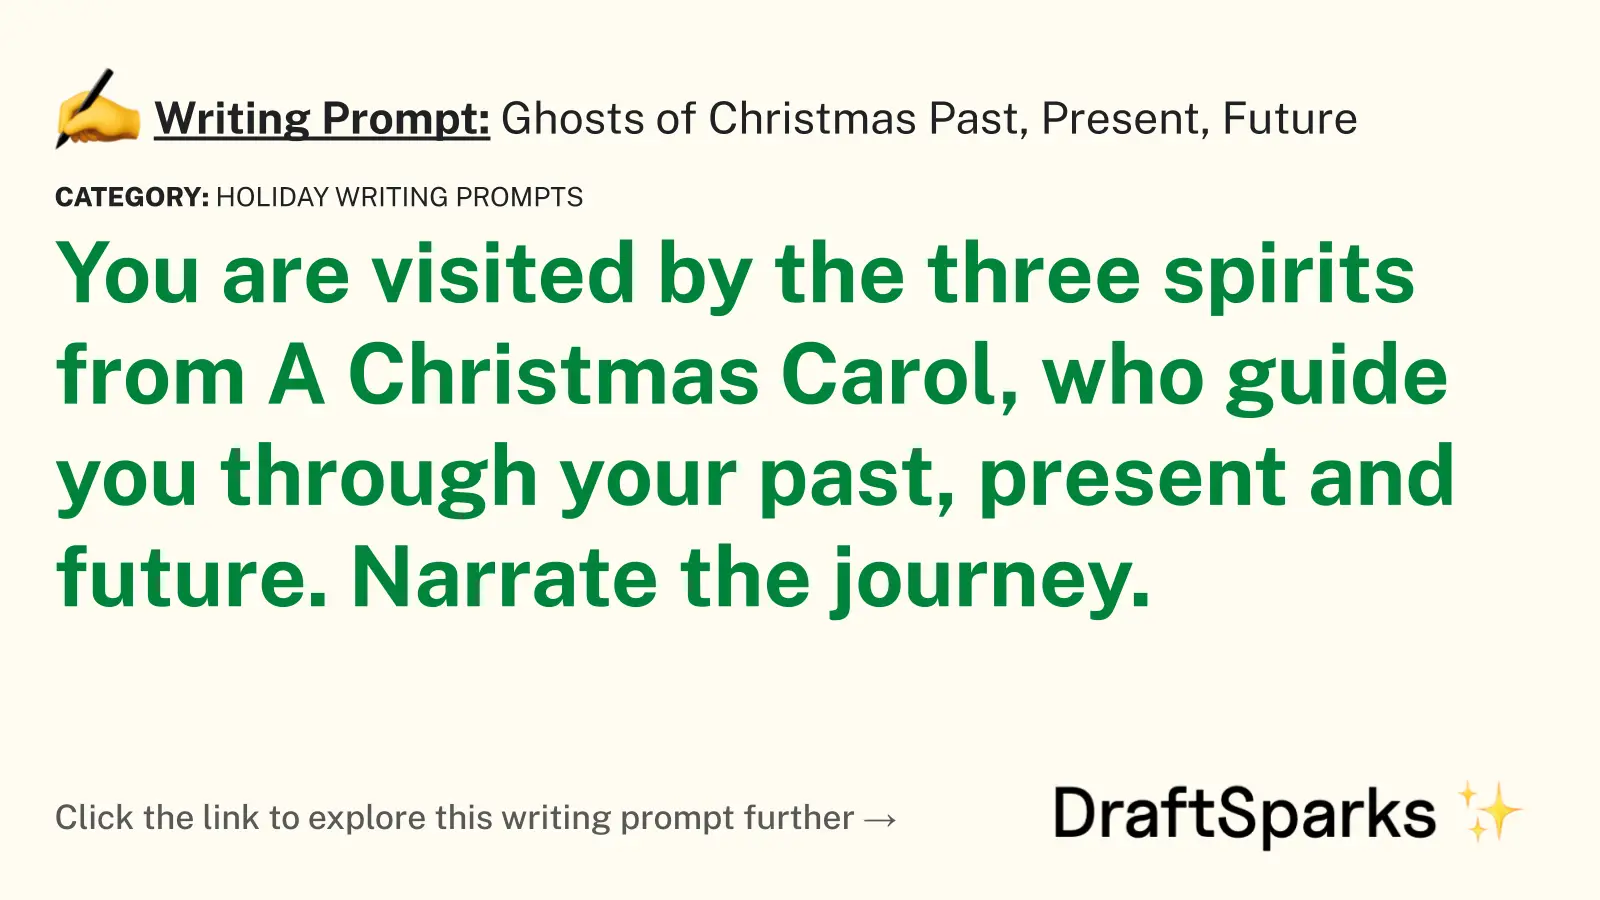 Ghosts of Christmas Past, Present, Future